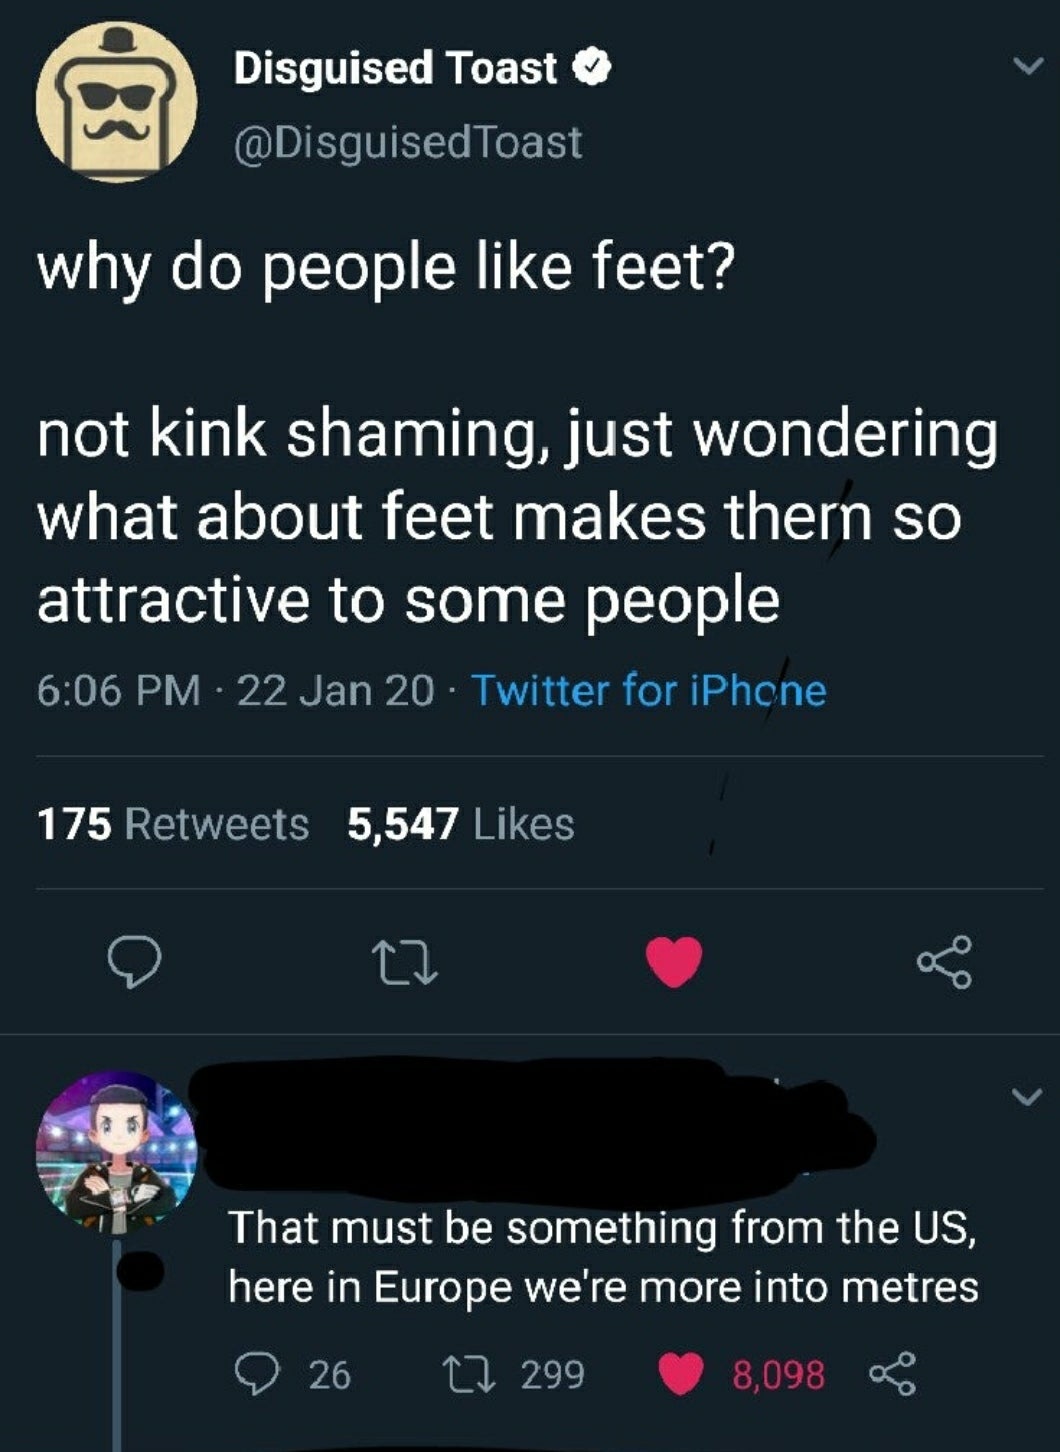 screenshot - Disguised Toast Toast why do people feet? not kink shaming, just wondering what about feet makes thern so attractive to some people 22 Jan 20 Twitter for iPhone ne 175 5,547 That must be something from the Us, here in Europe we're more into m